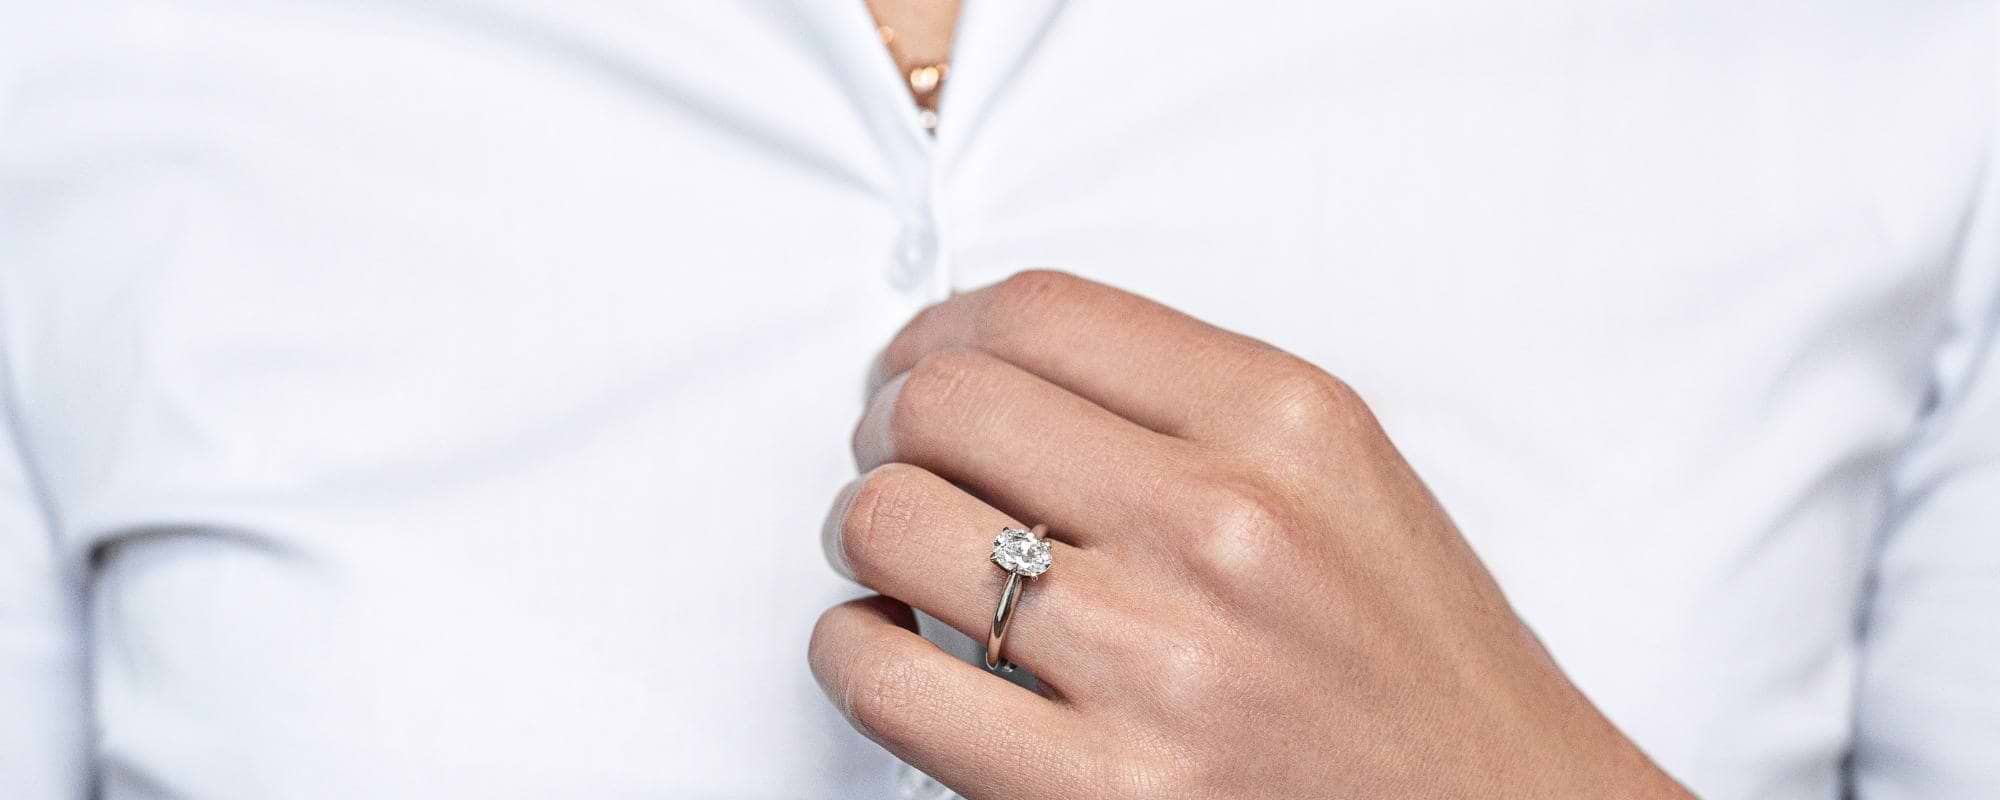 How to Find the Best Engagement Rings for Doctors & Nurses